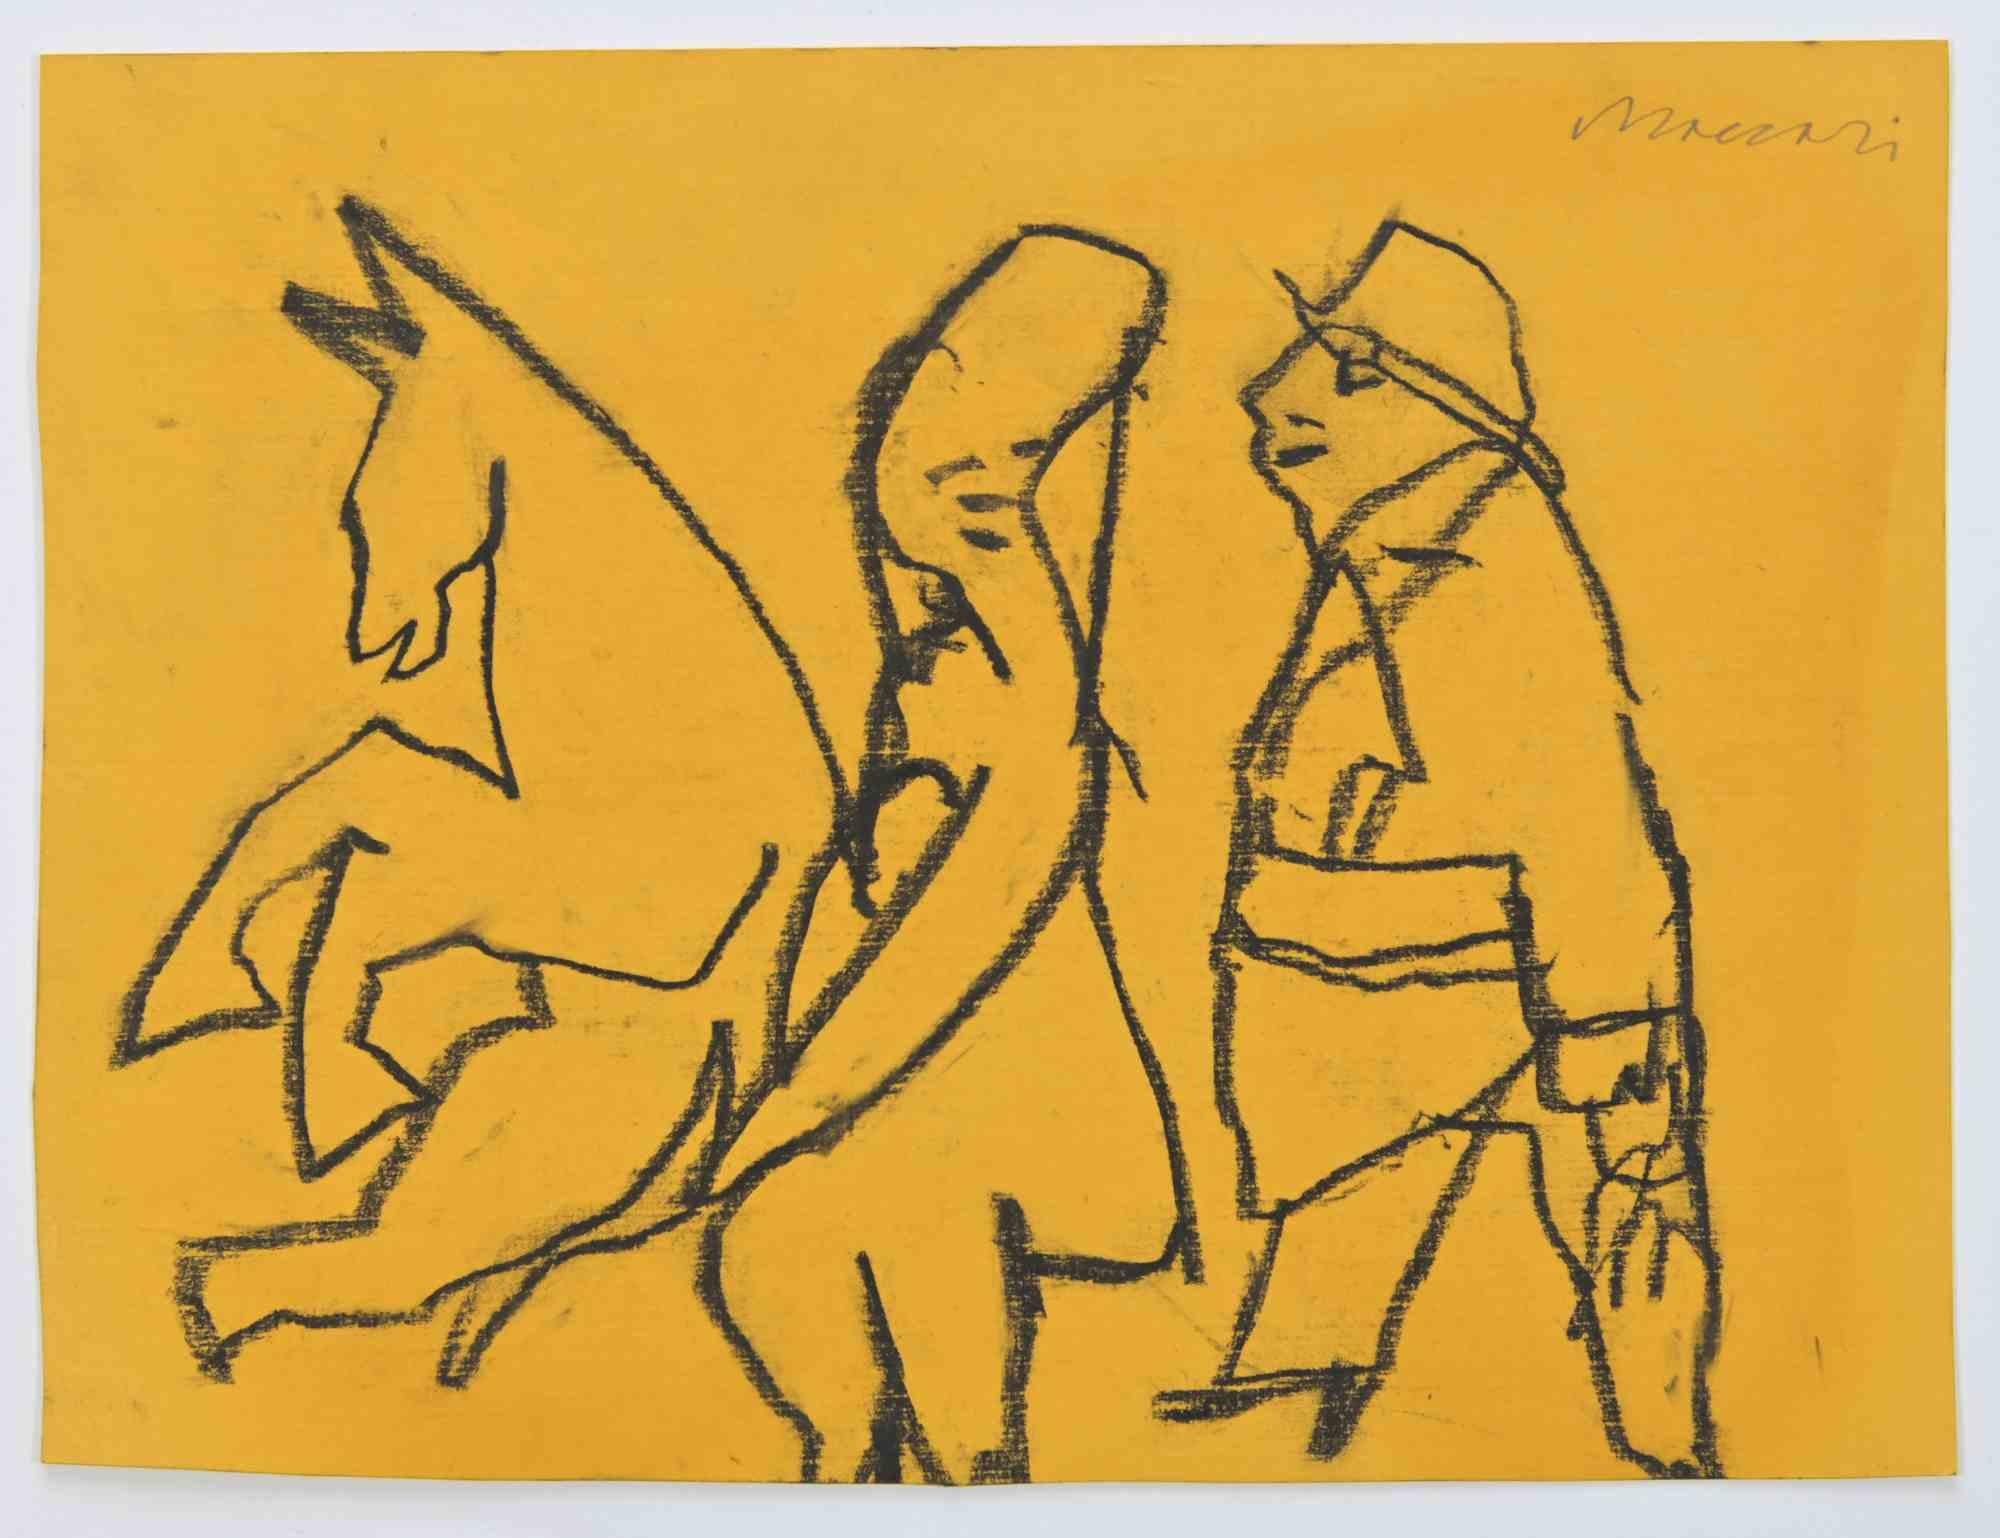 The Spouse and Horse is a Carbon Pencil Drawing realized by Mino Maccari  (1924-1989) in the 1970s.

Hand-signed on the margin.

Good condition.

Mino Maccari (Siena, 1924-Rome, June 16, 1989) was an Italian writer, painter, engraver and journalist,